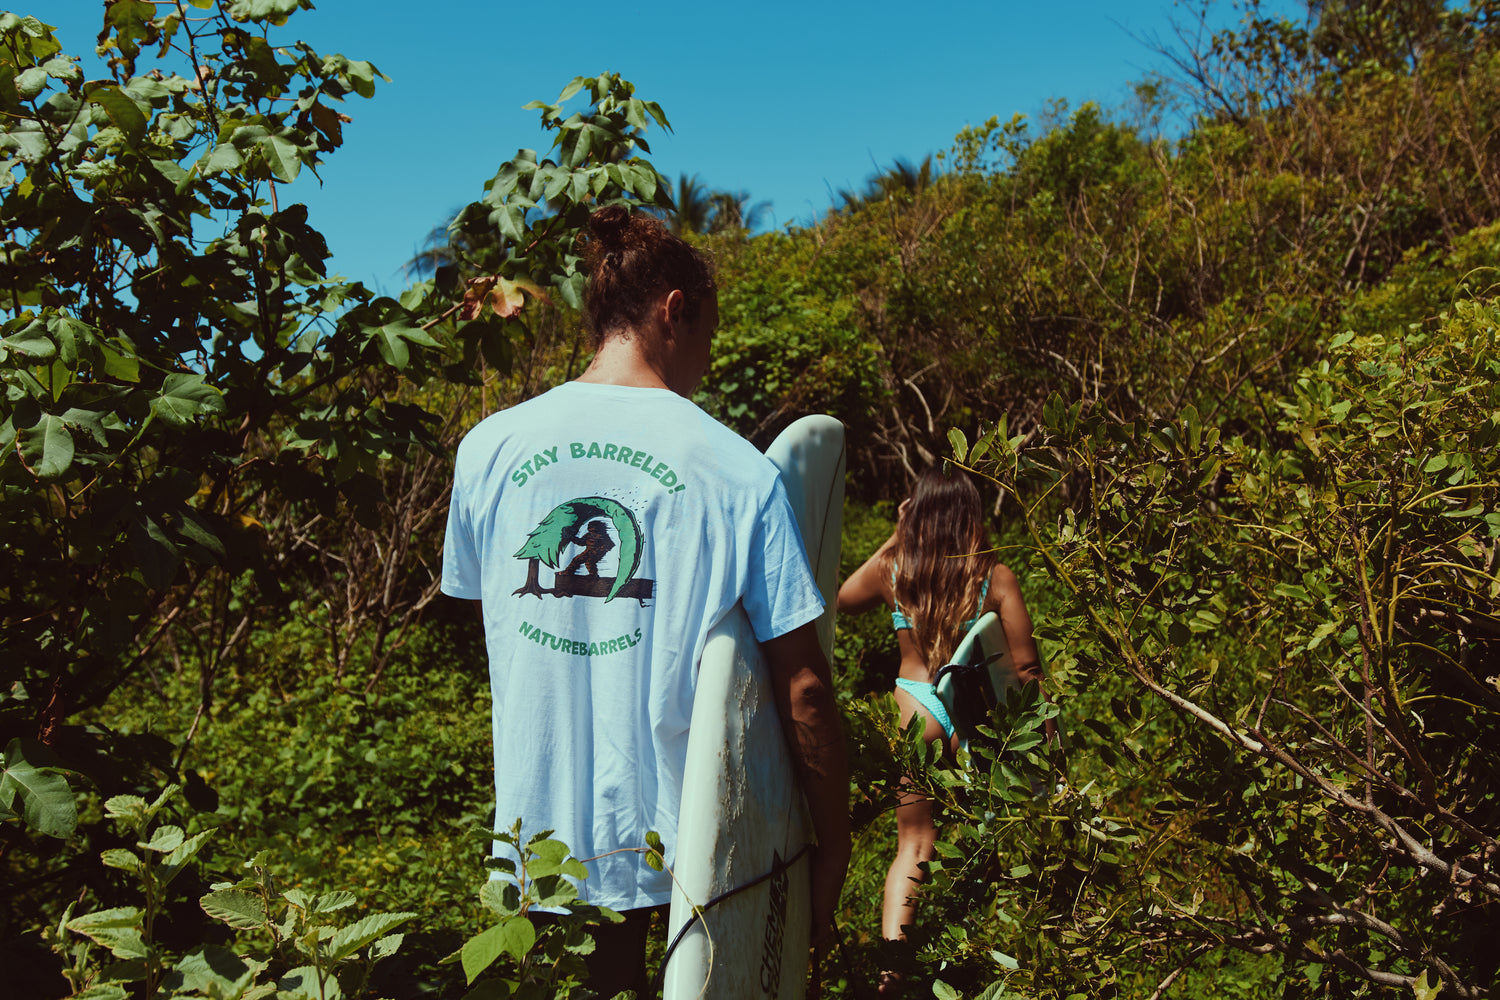 A person walking through a lush green path carrying a surfboard wearing a white t-shirts that reads 'STAY BARRELED! NATUREBARRELS' on the back. A woman can be seen carrying a surfboard head of him.